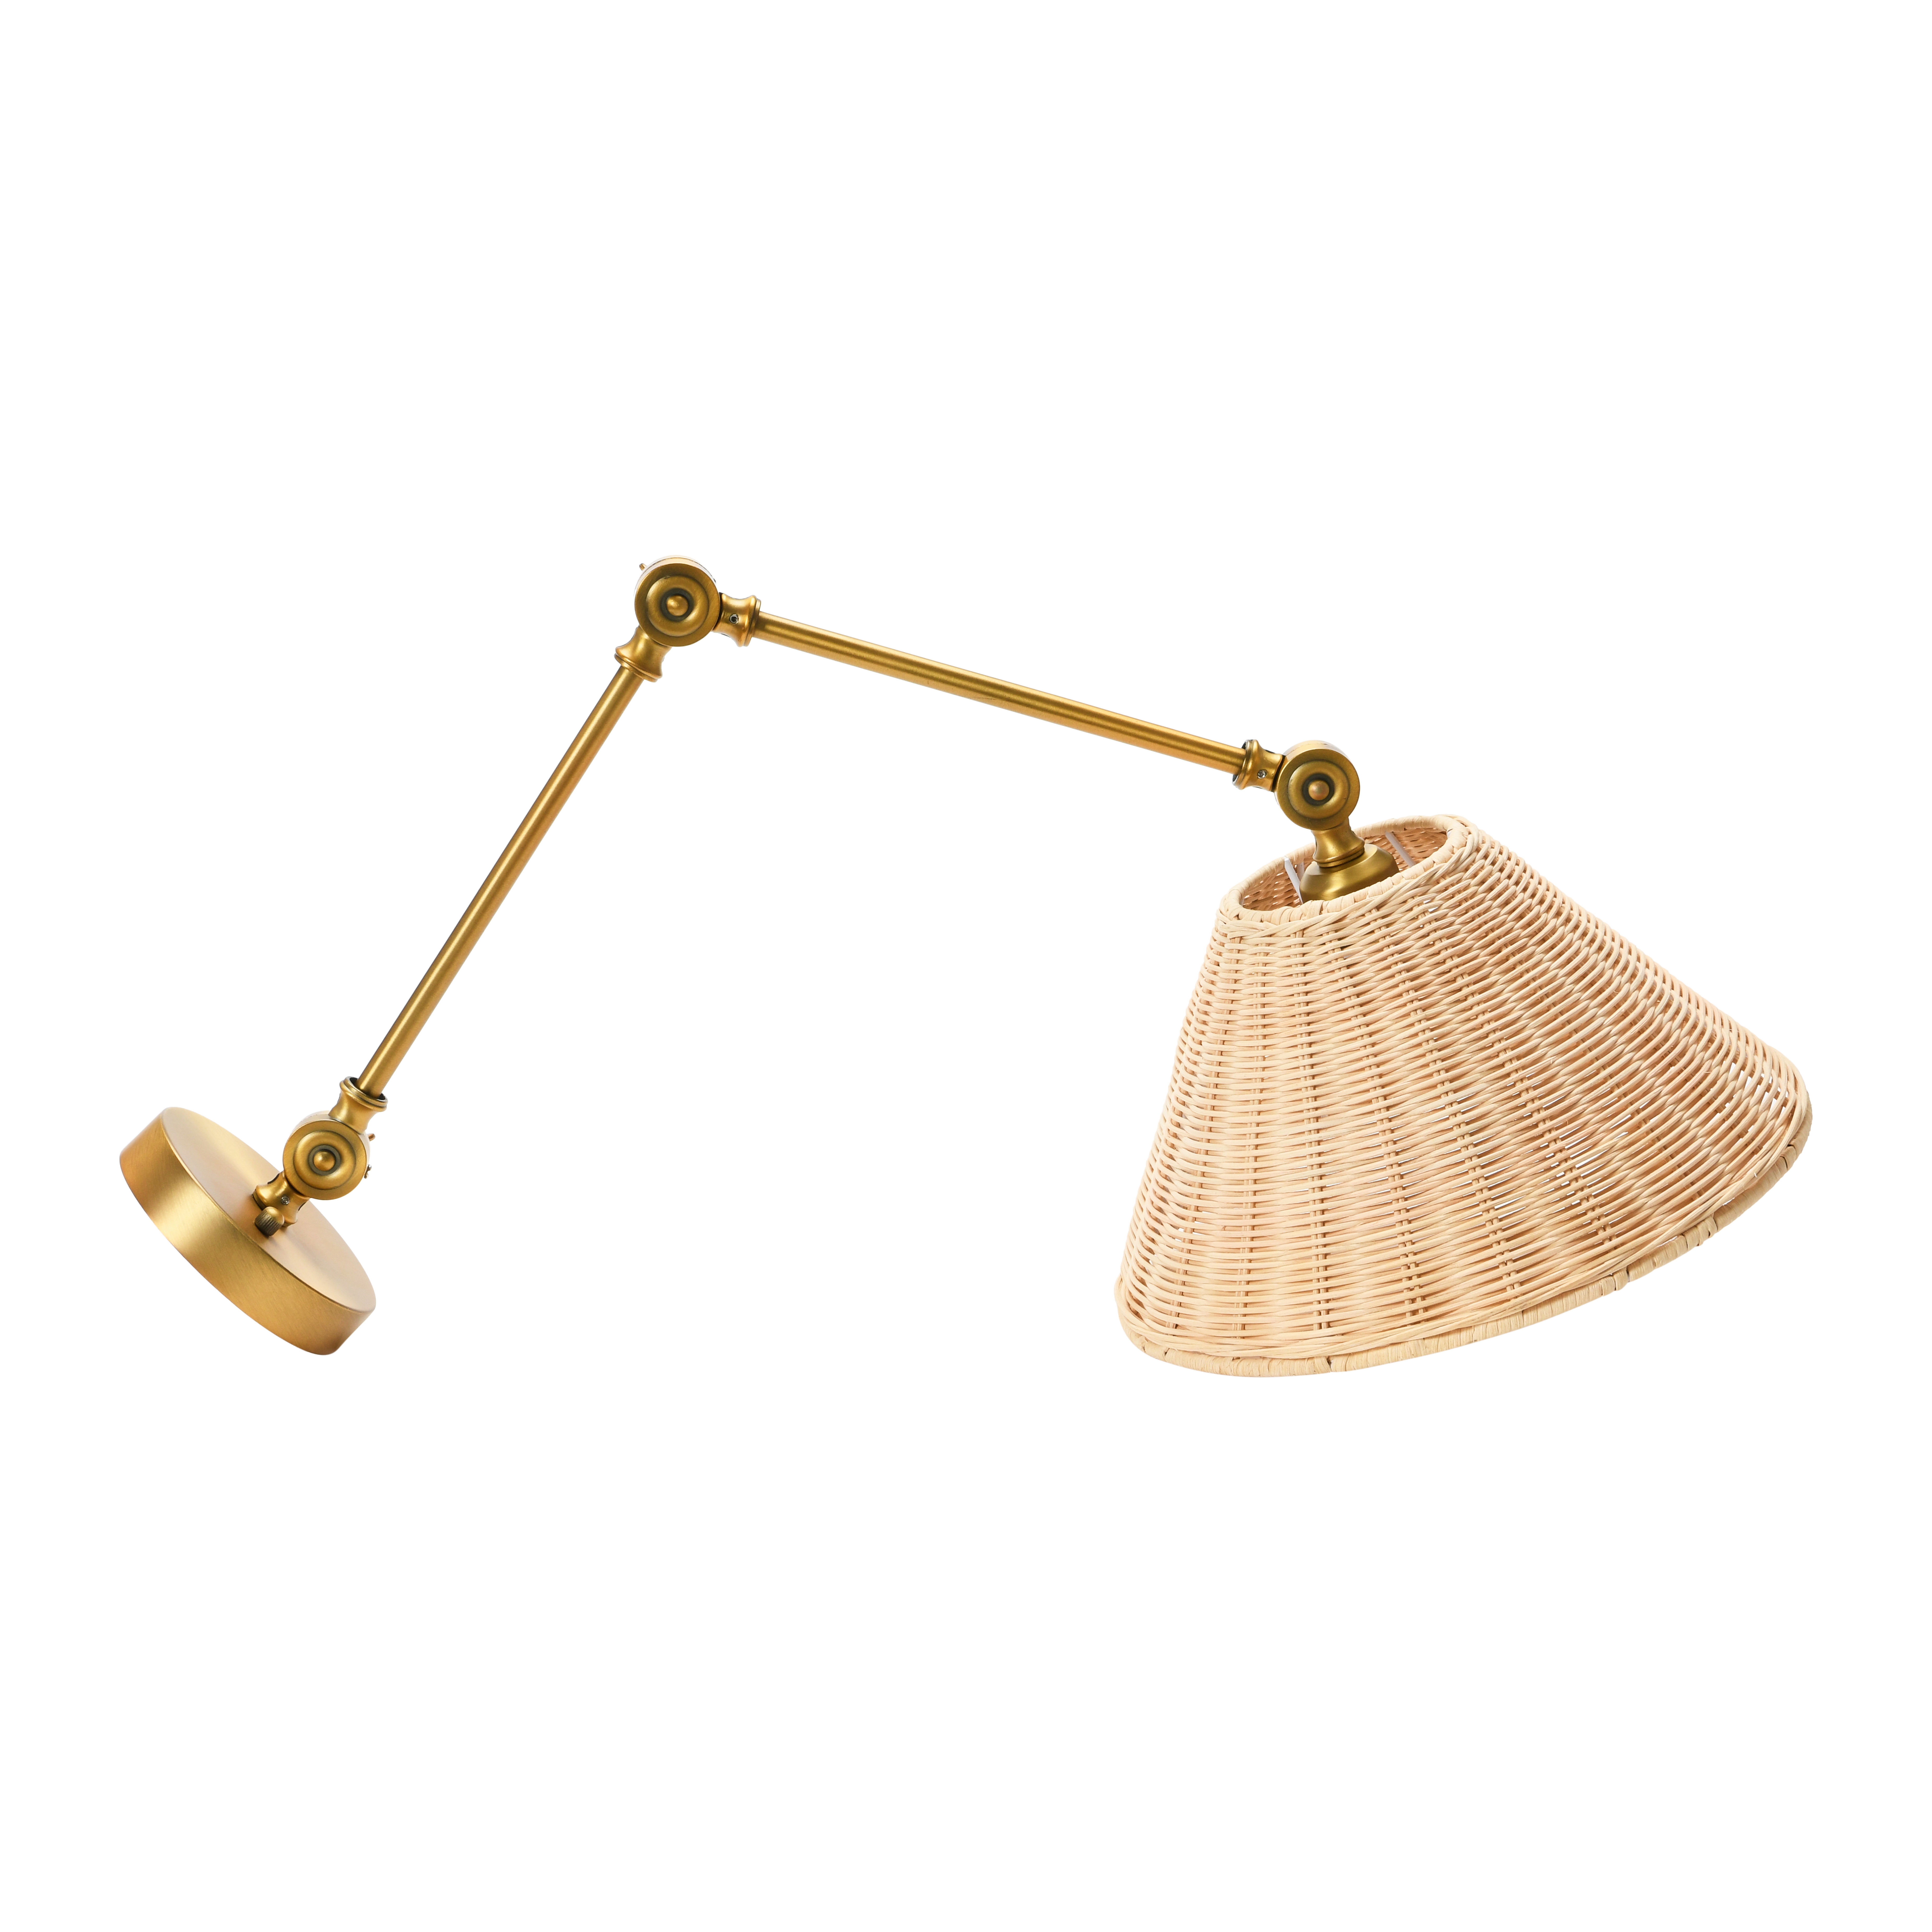 Coastal Adjustable Wall Sconce with Neutral Beige Rattan Shades, Antique Metal Brass Finish - Creative Co-Op